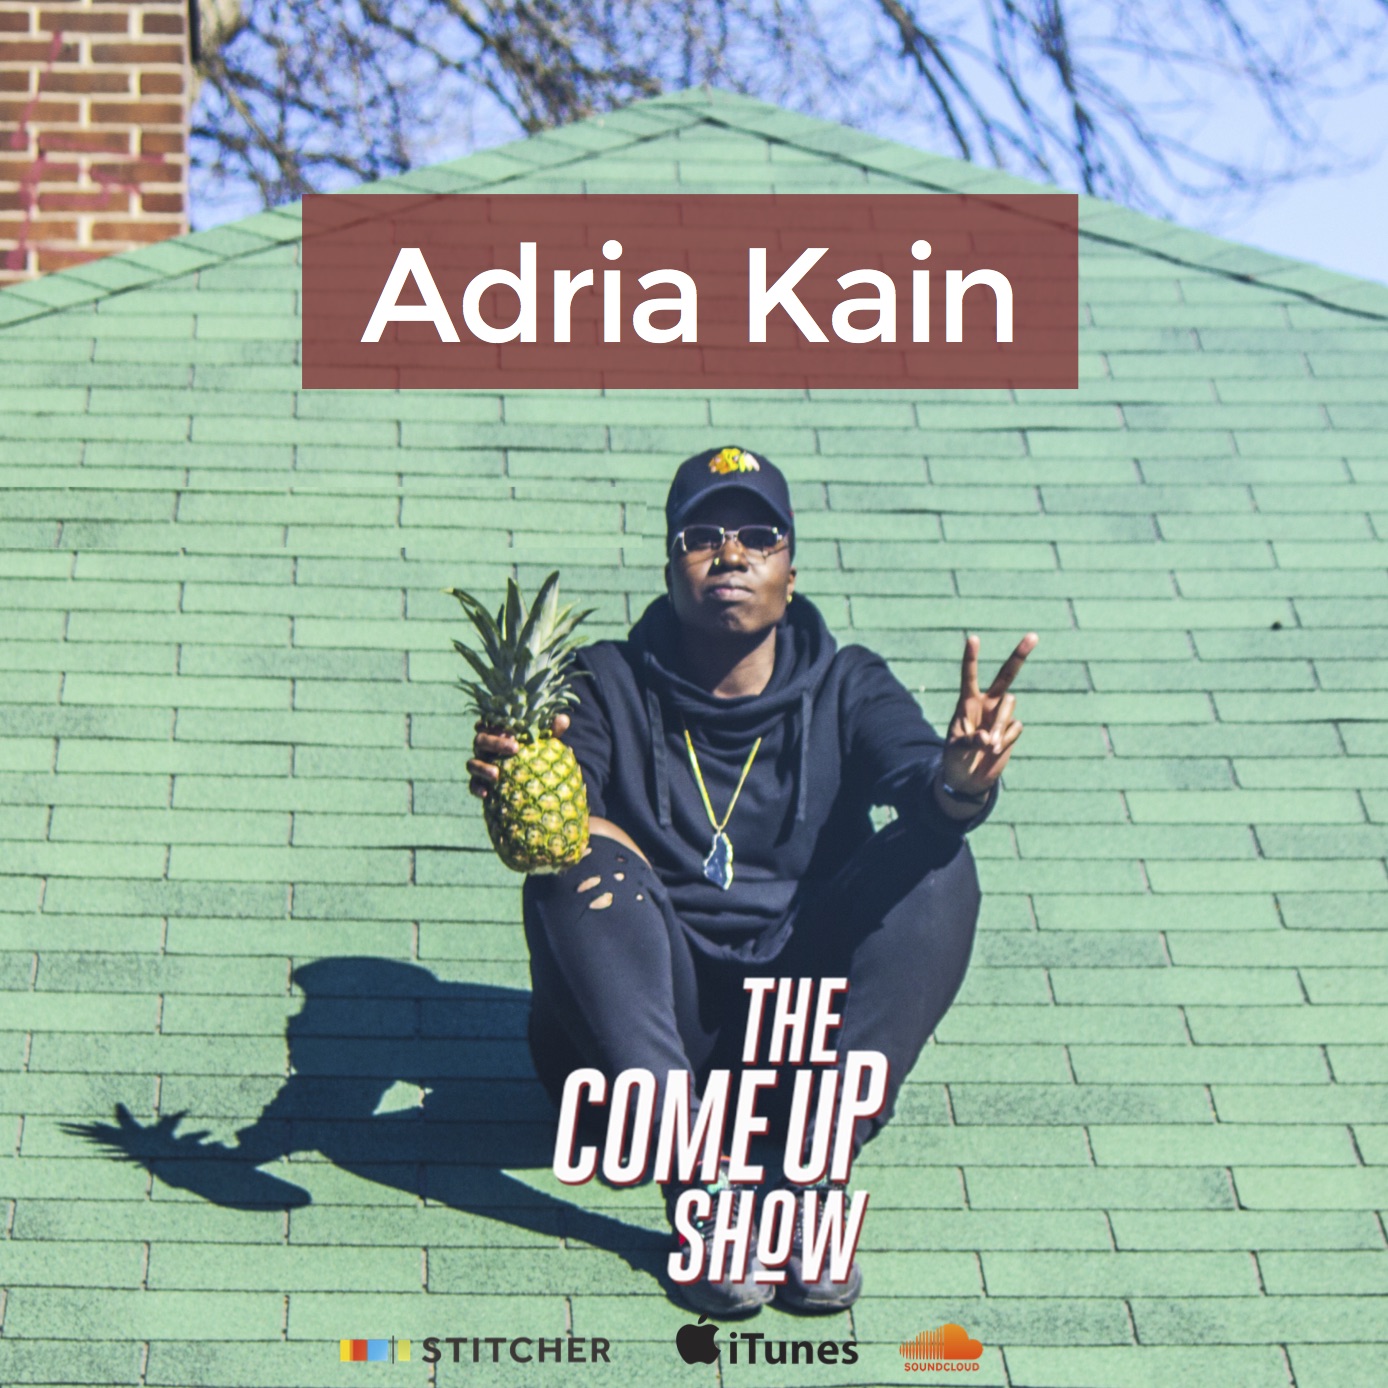 Thumbnail for "Adria Kain: I'm tired of living broke trying to chase this dream... But I love this sh*t".